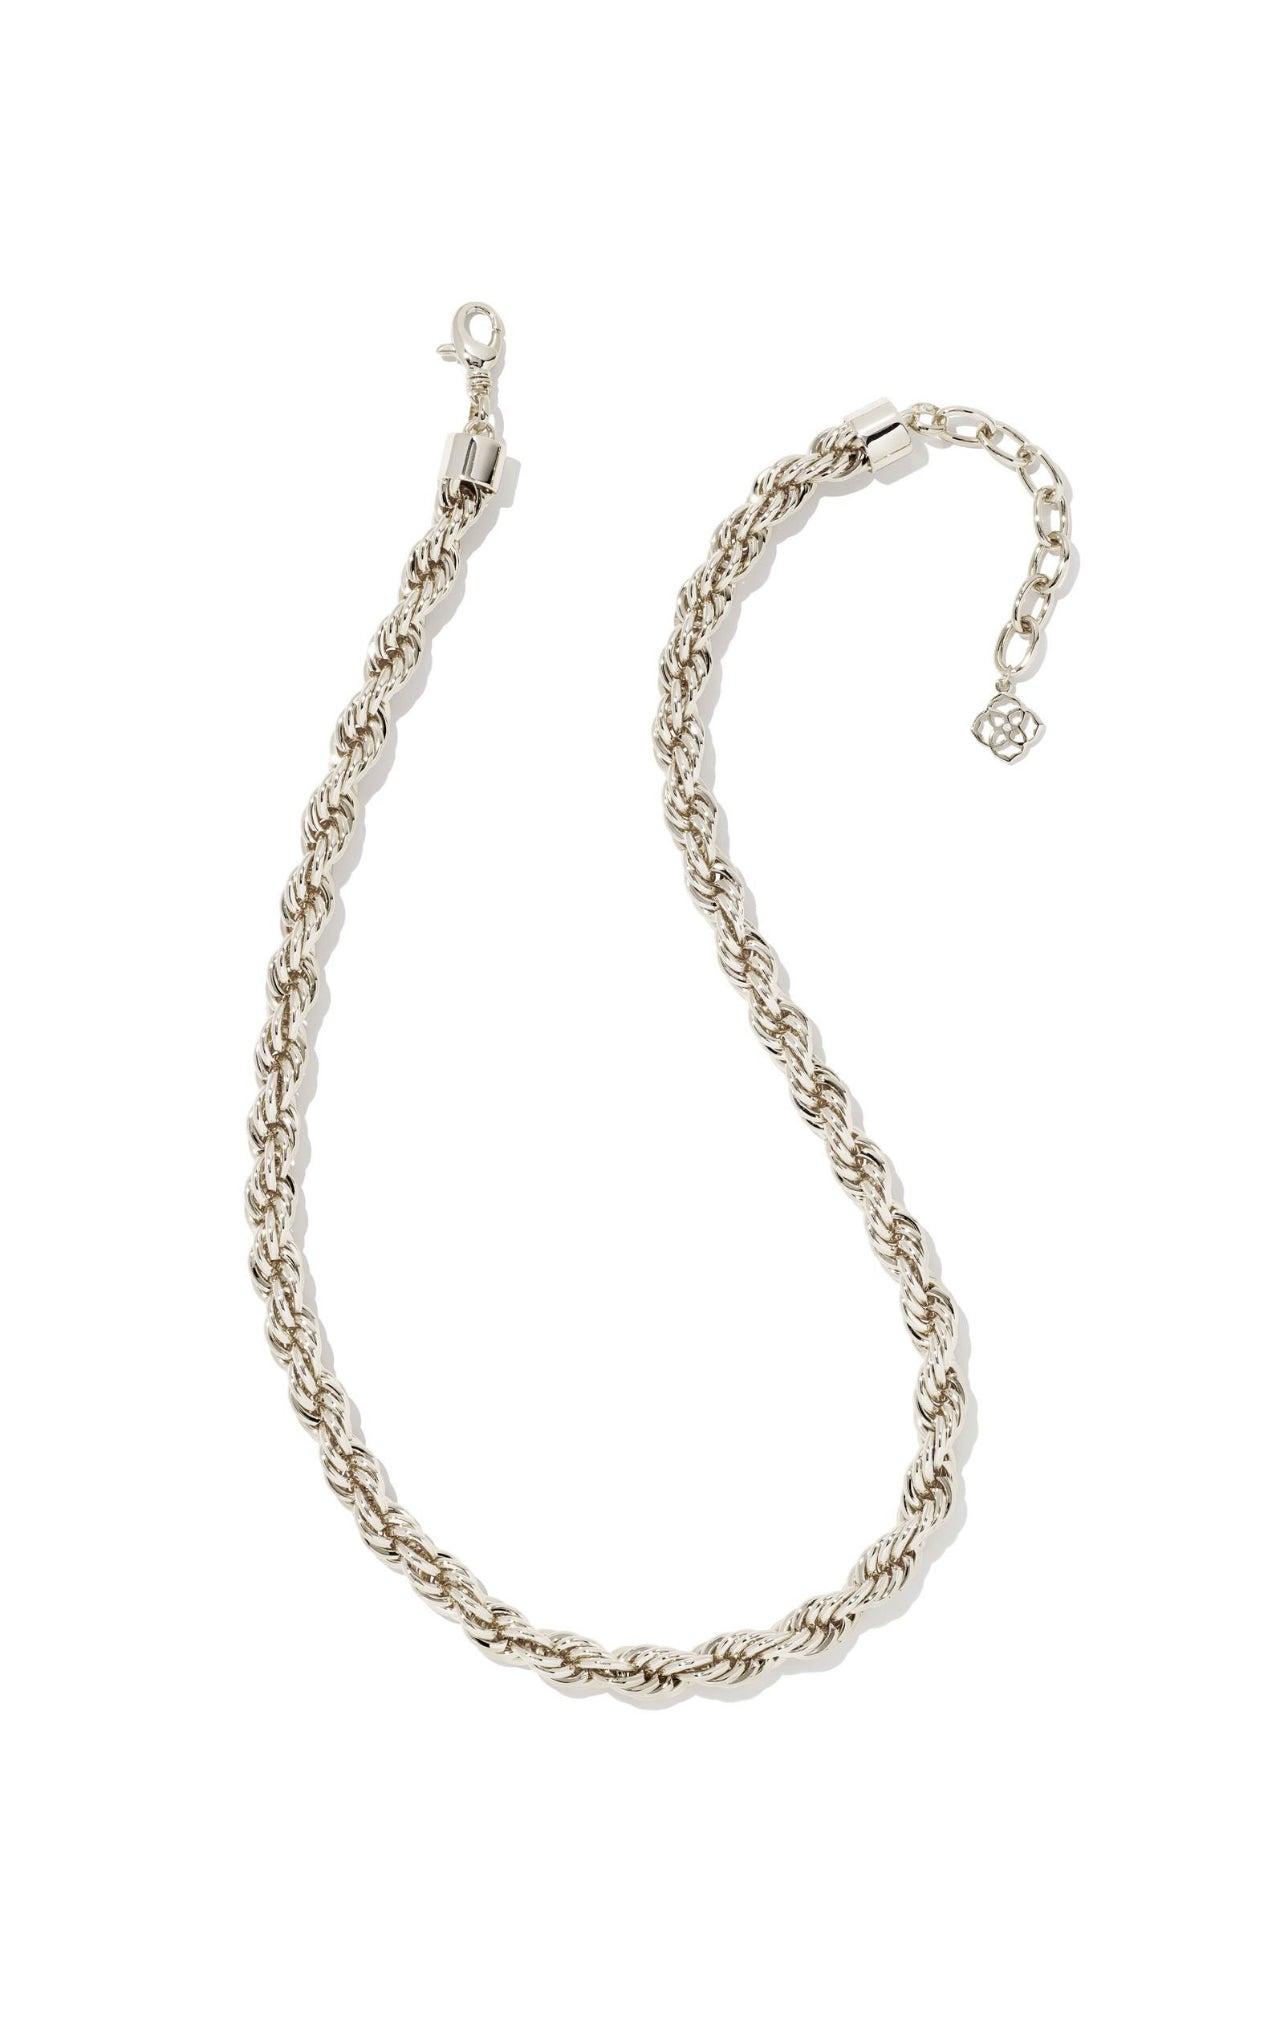 Merrick Chain Necklace in Silver